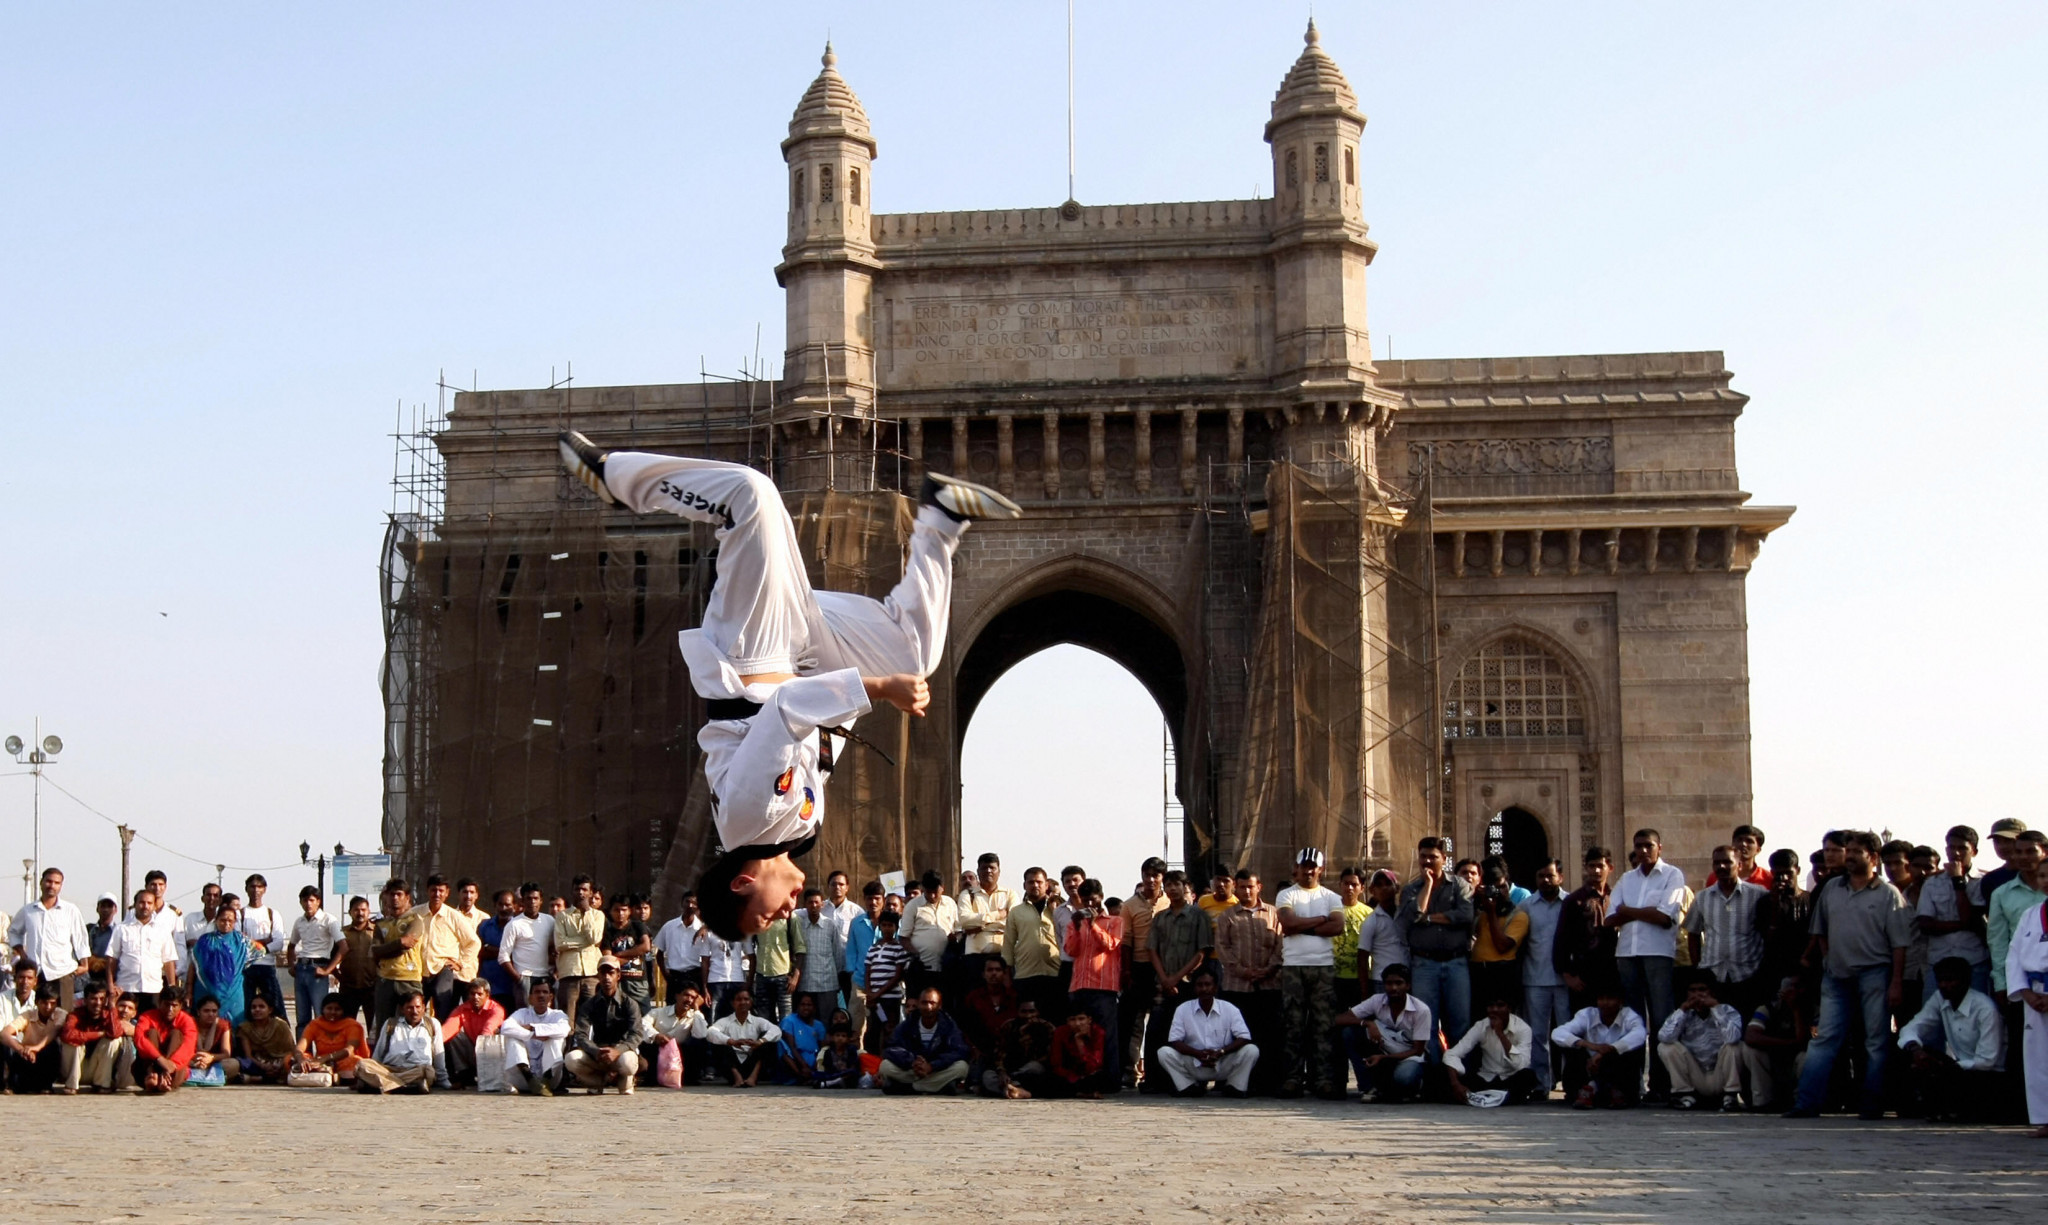 A franchise league is planned for taekwondo in India ©Getty Images